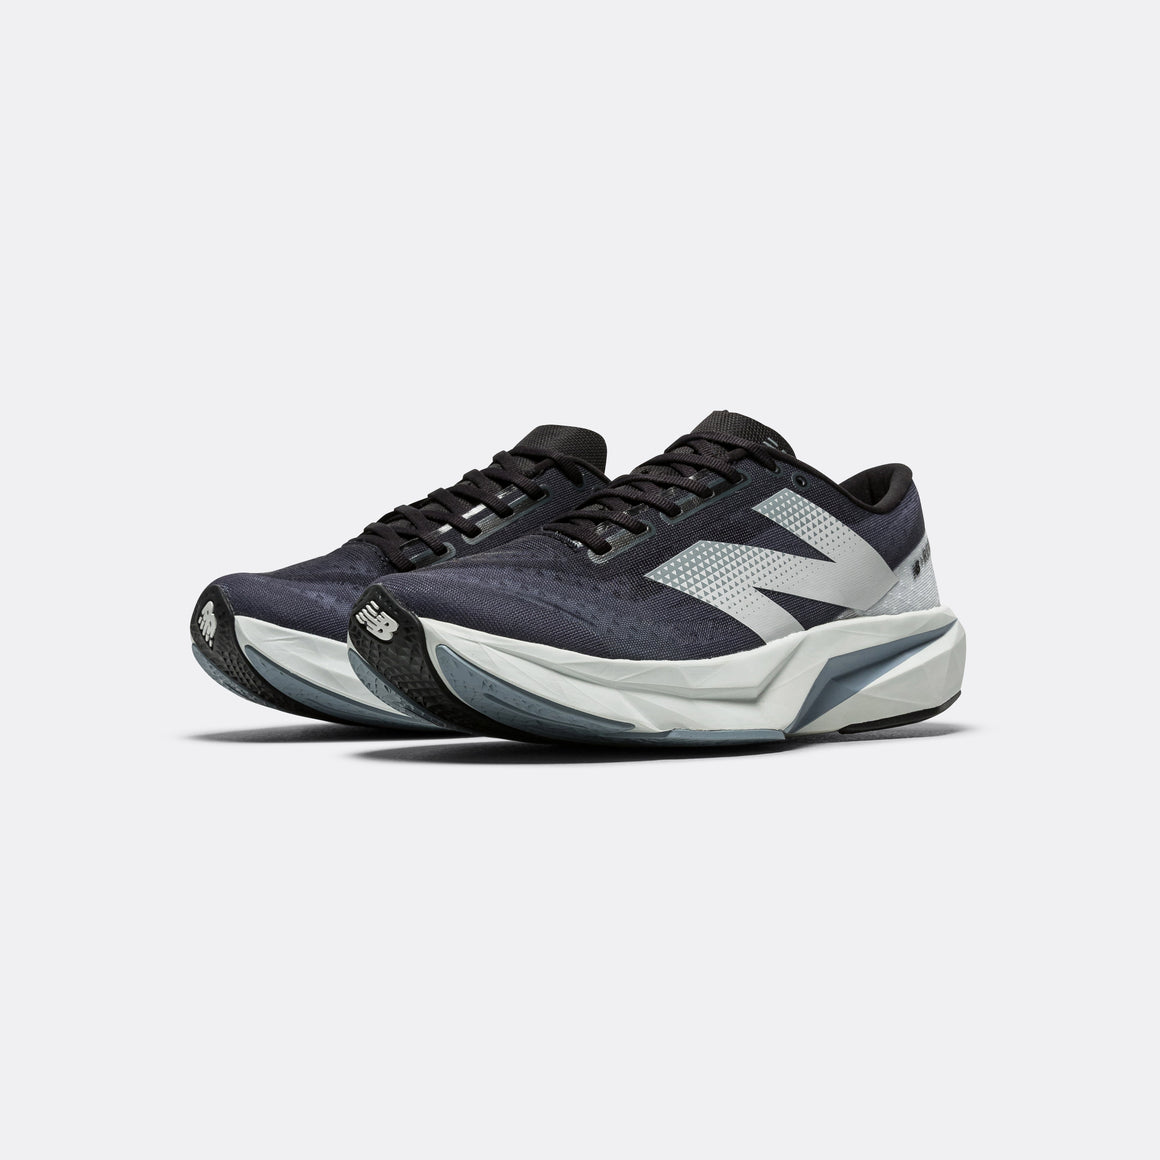 New Balance - Mens FuelCell Rebel v4 - Black - Up There Athletics